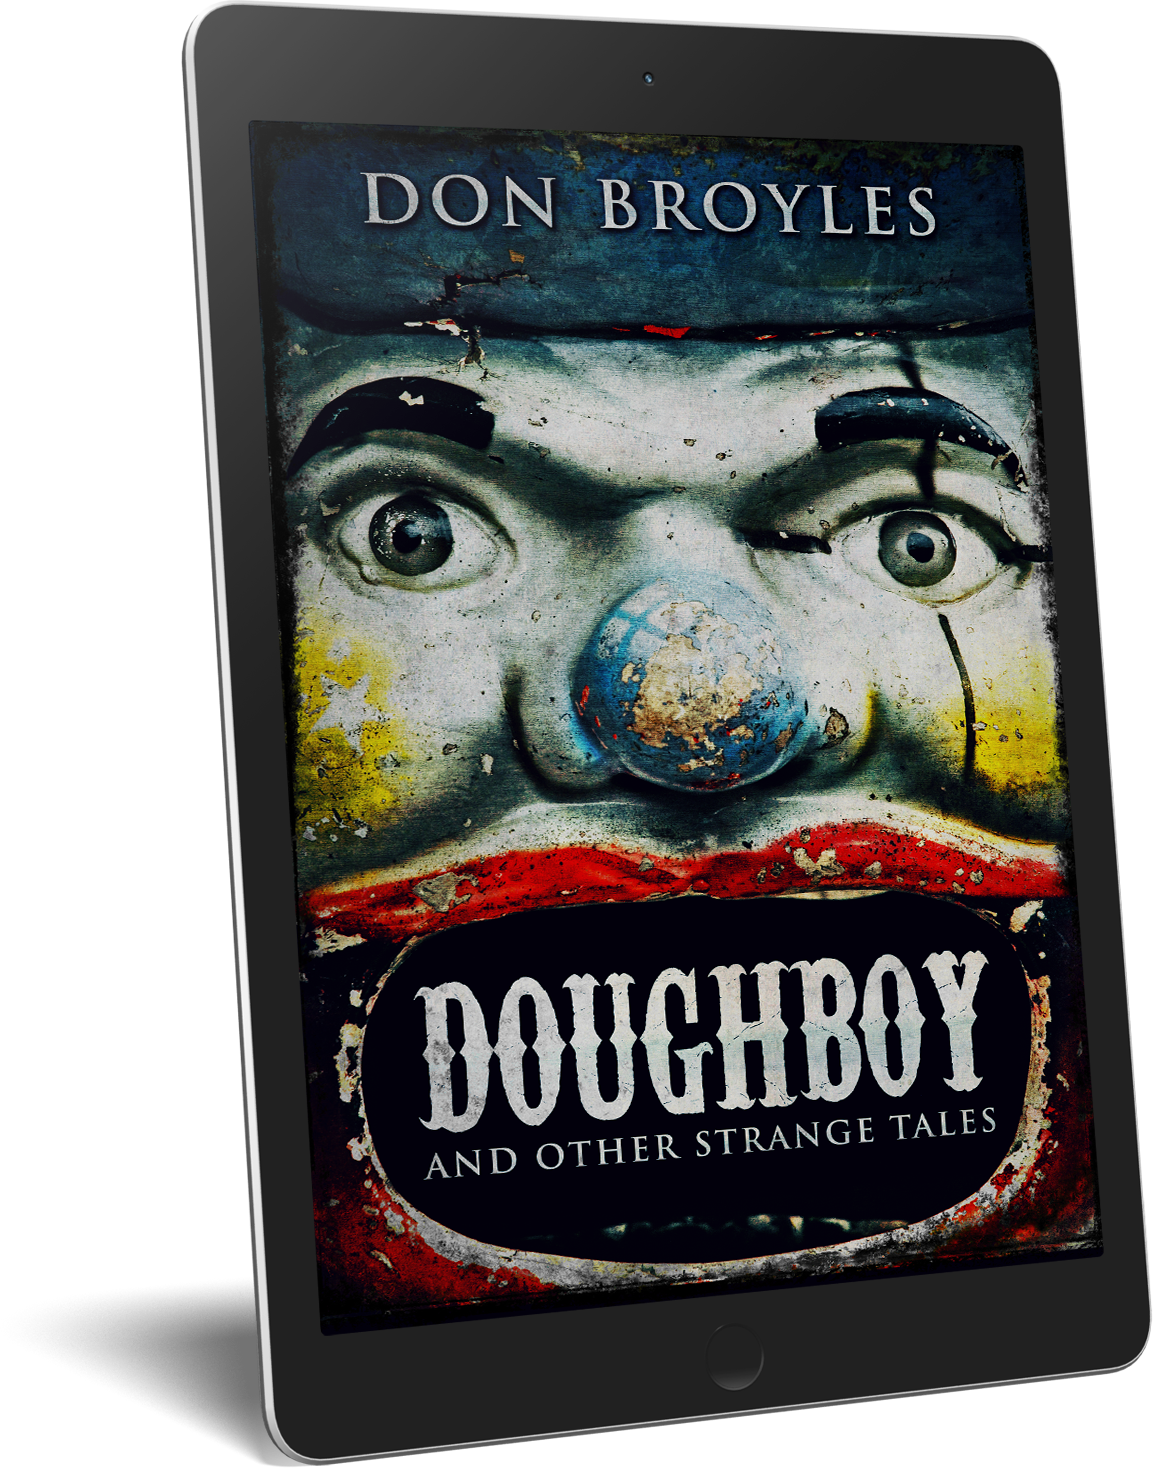 FREE: Doughboy and other Strange Tales by Don Broyles